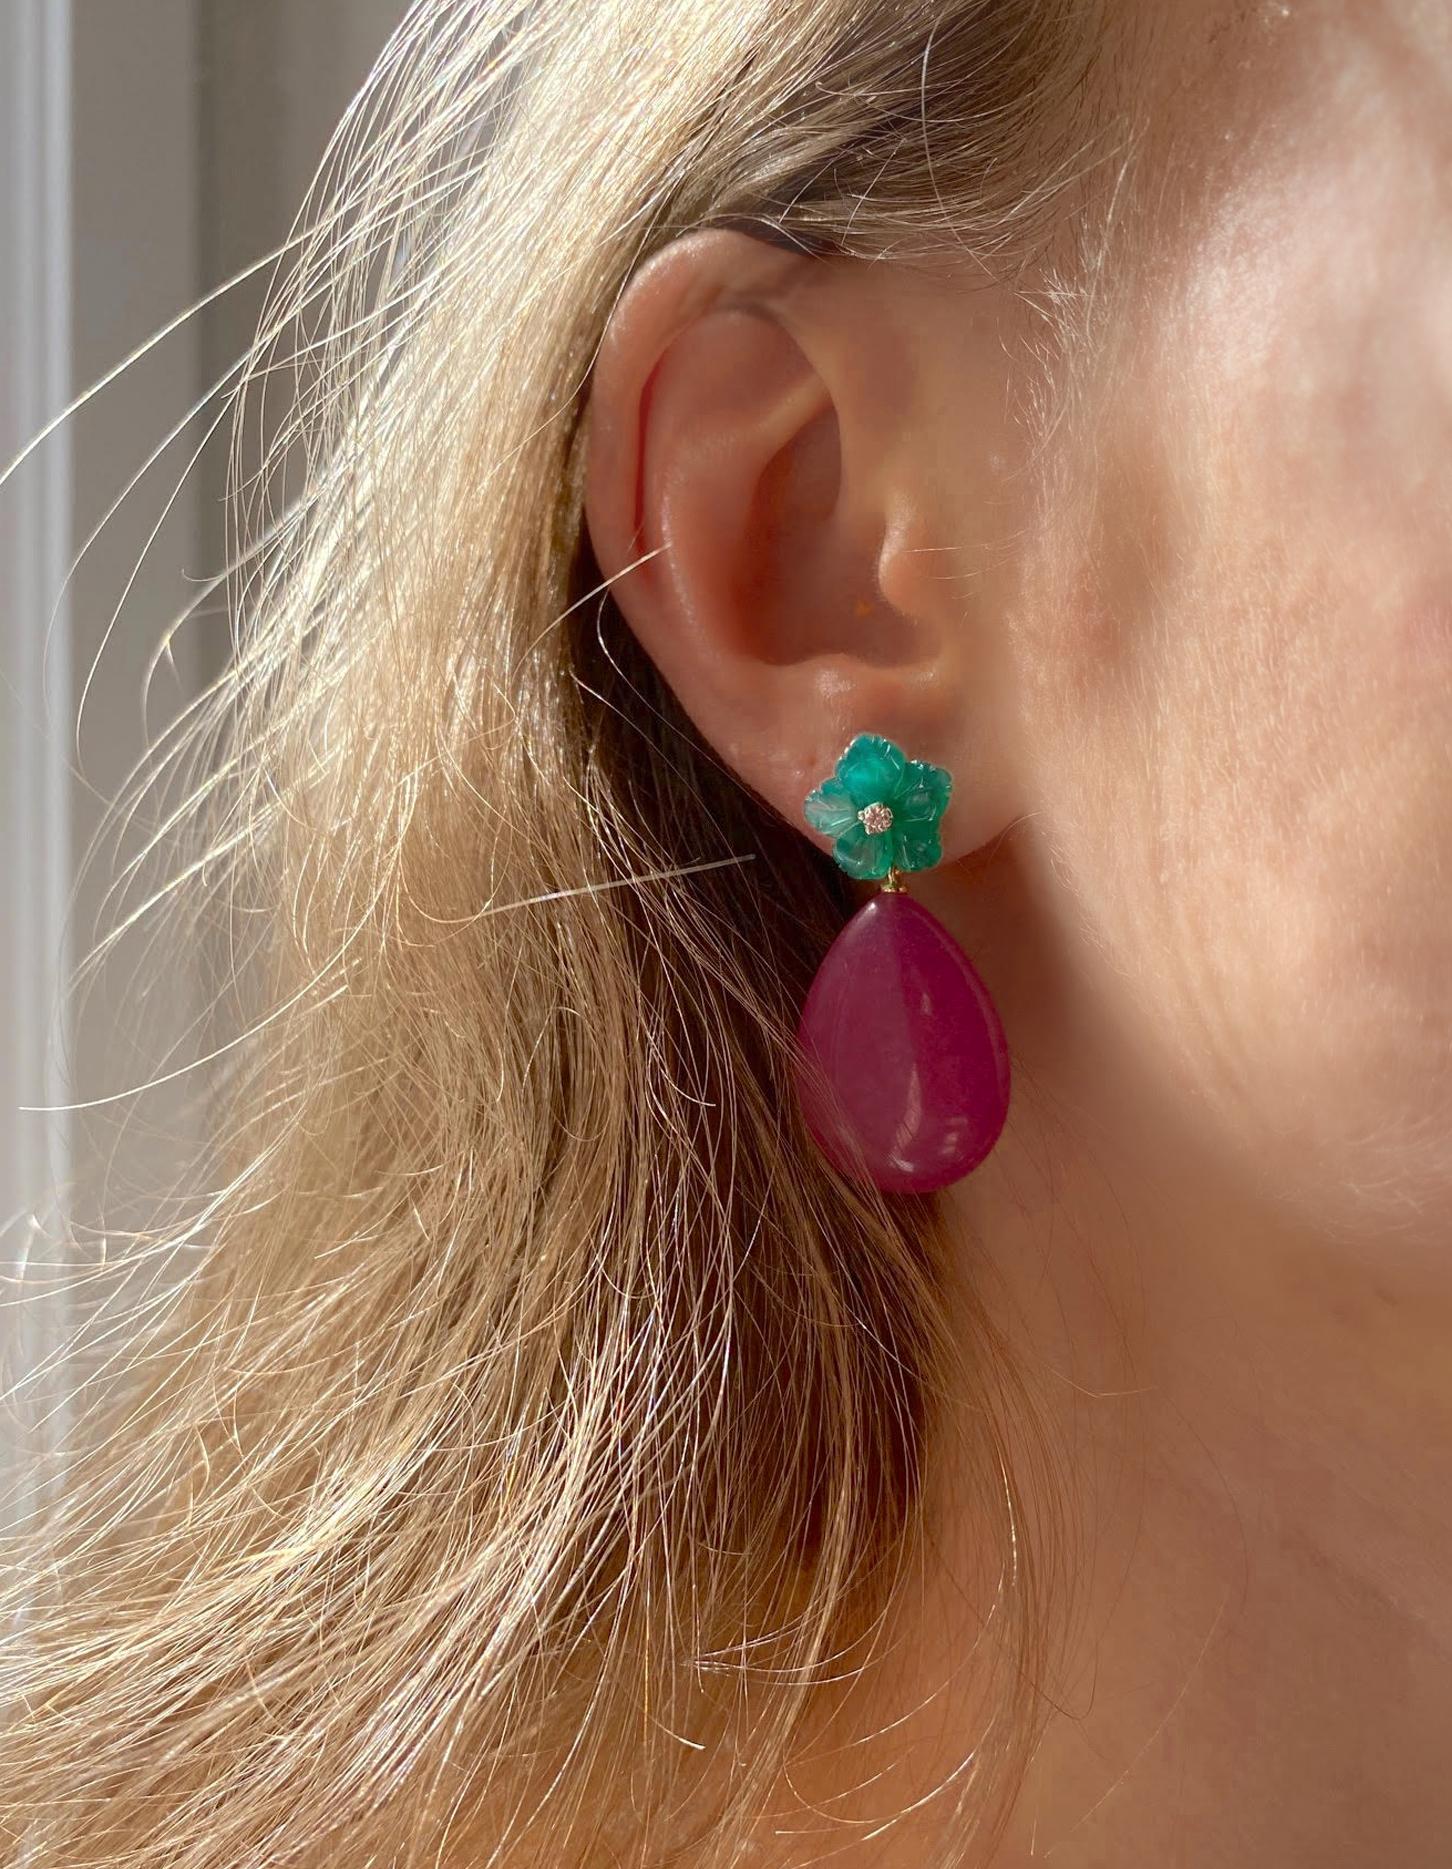 Rossella Ugolini Design Collection, beautiful dangle earrings entirely handcrafted in 18 karats Yellow gold and enriched with Intense deep red Jade drops, green agate flowers and a 0.06 carat white Diamonds.  Joyful colors are perfect to improve